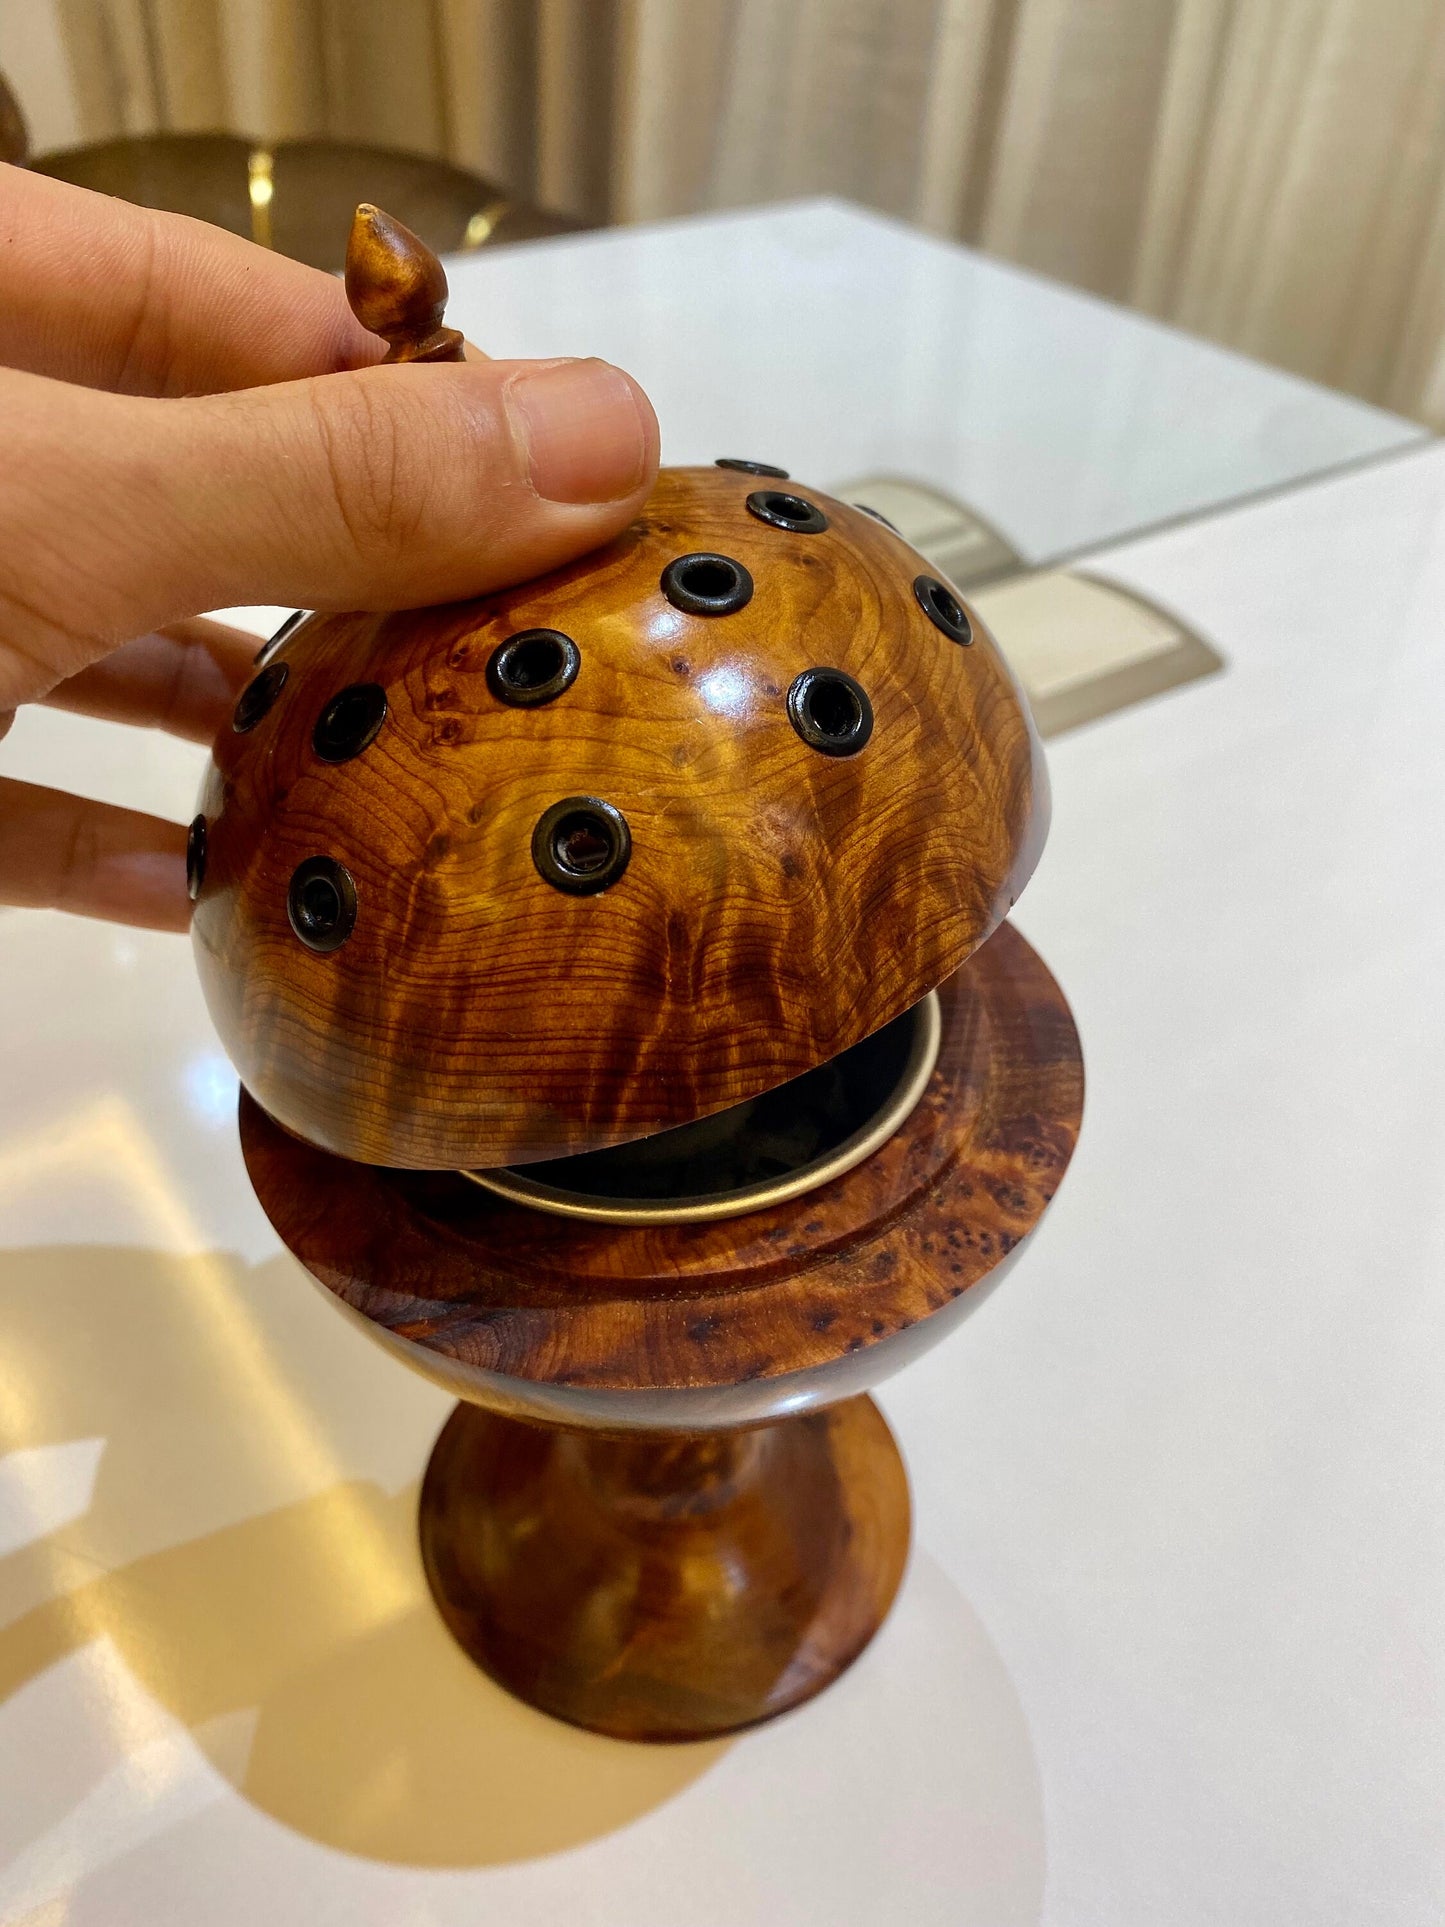 4"x4" Moroccan Handcrafted Ball thuya Wood Incense Burner with Slow Release Tub Feature,Gift idea,incense burner with drawer,home decor